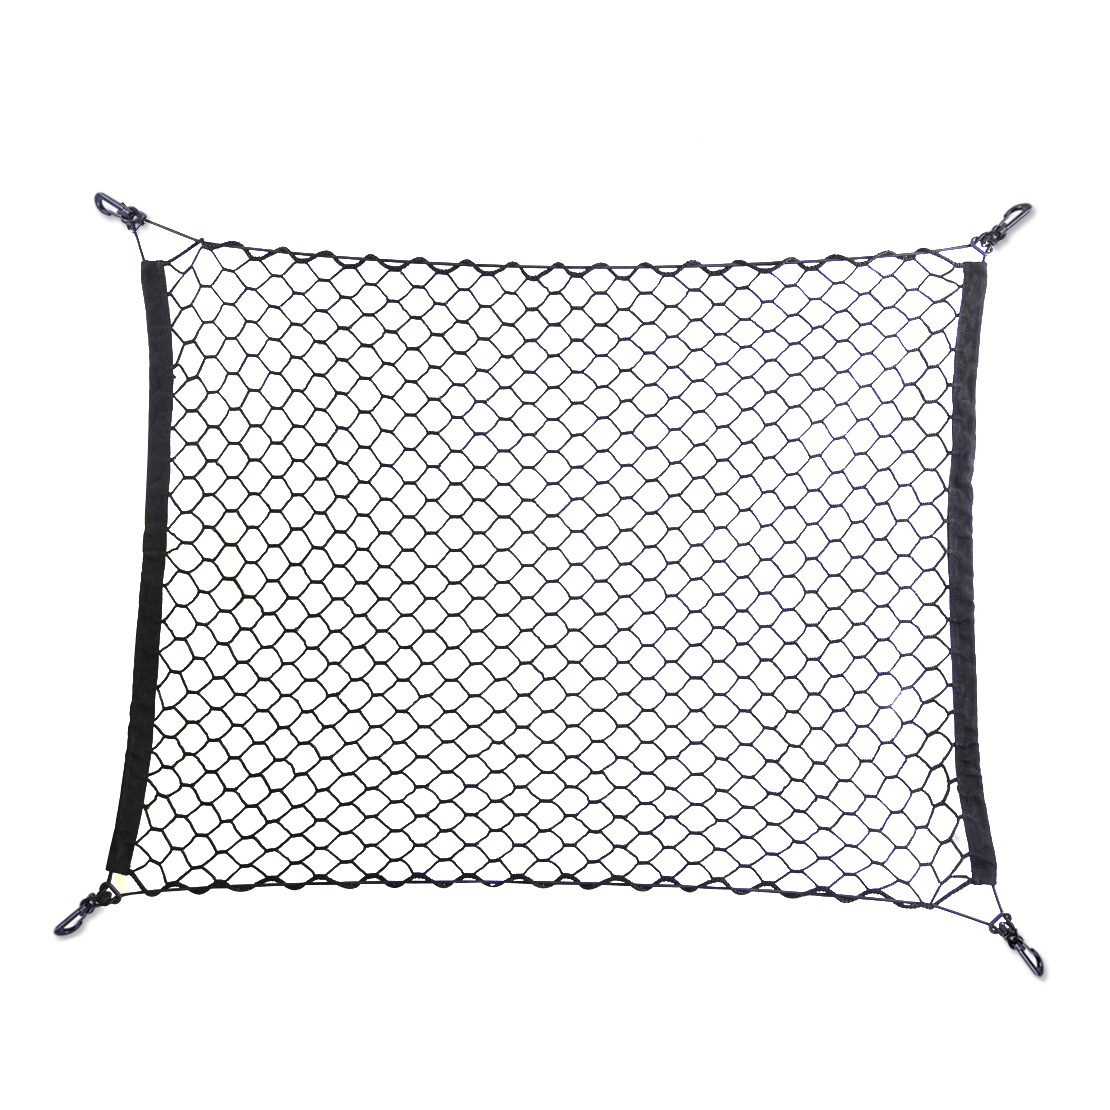 Car Stowing Tidying Auto Elastic Storage Net String Mesh Bag different size 